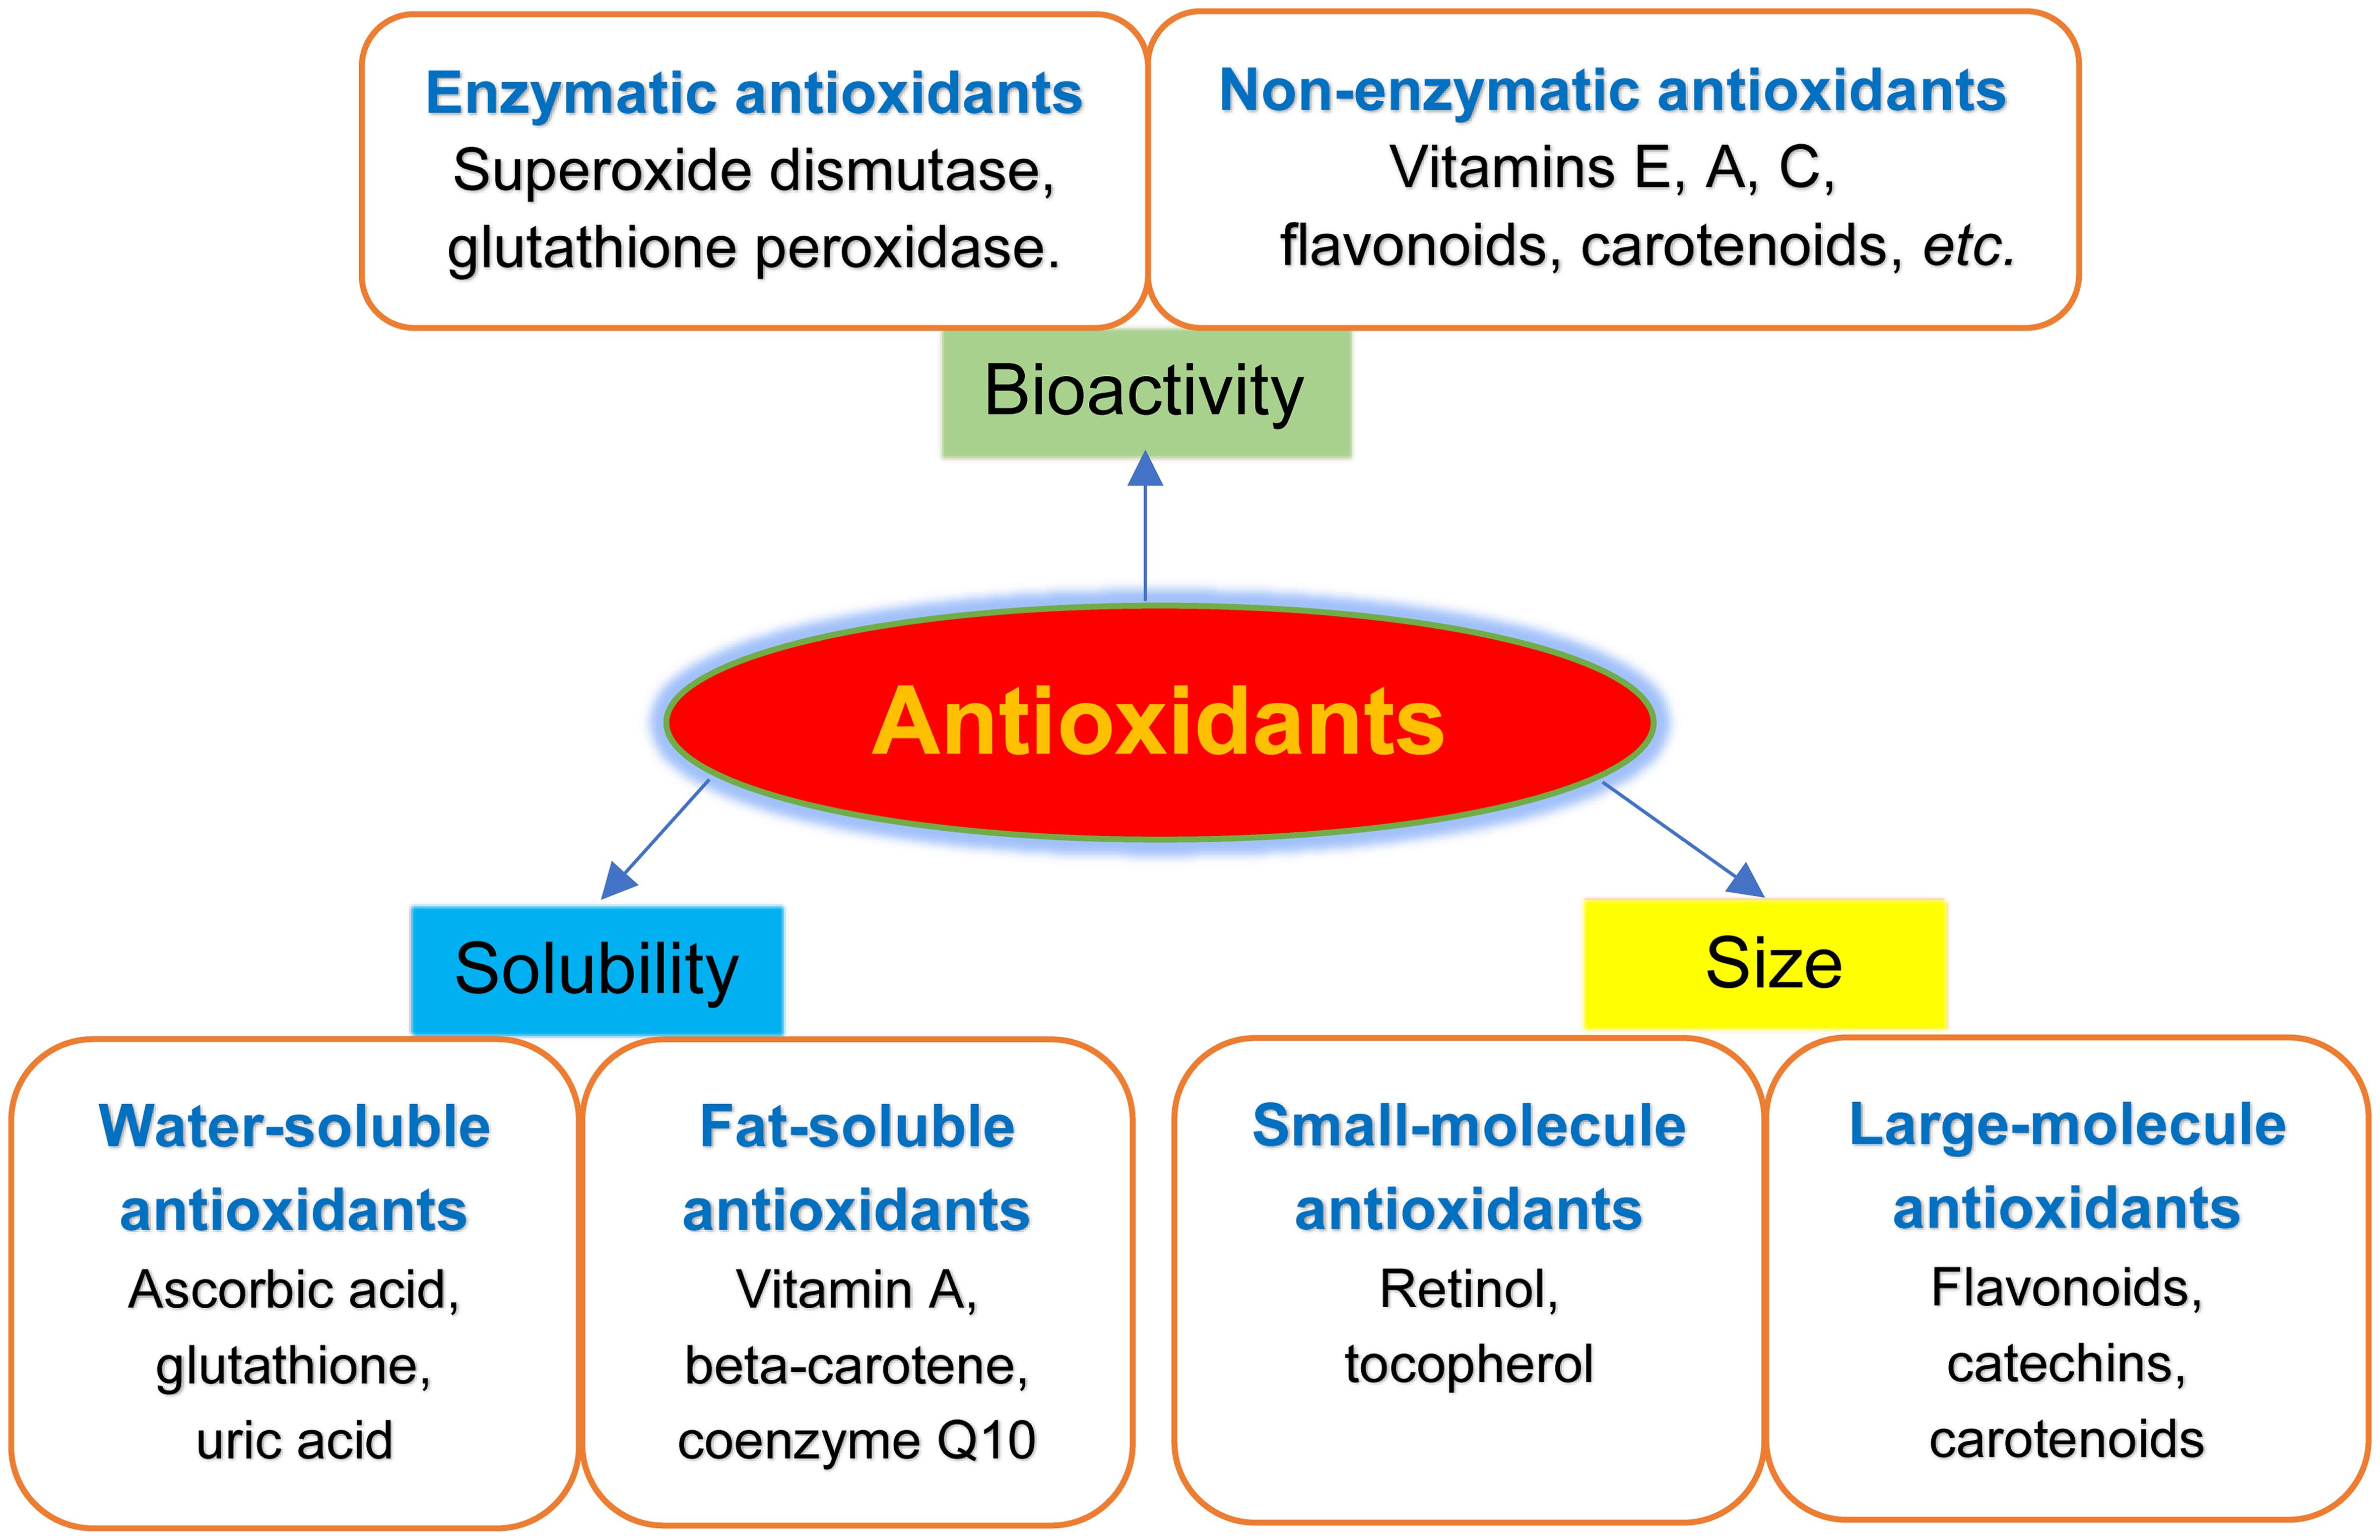 Antioxidant enzymes in disease prevention